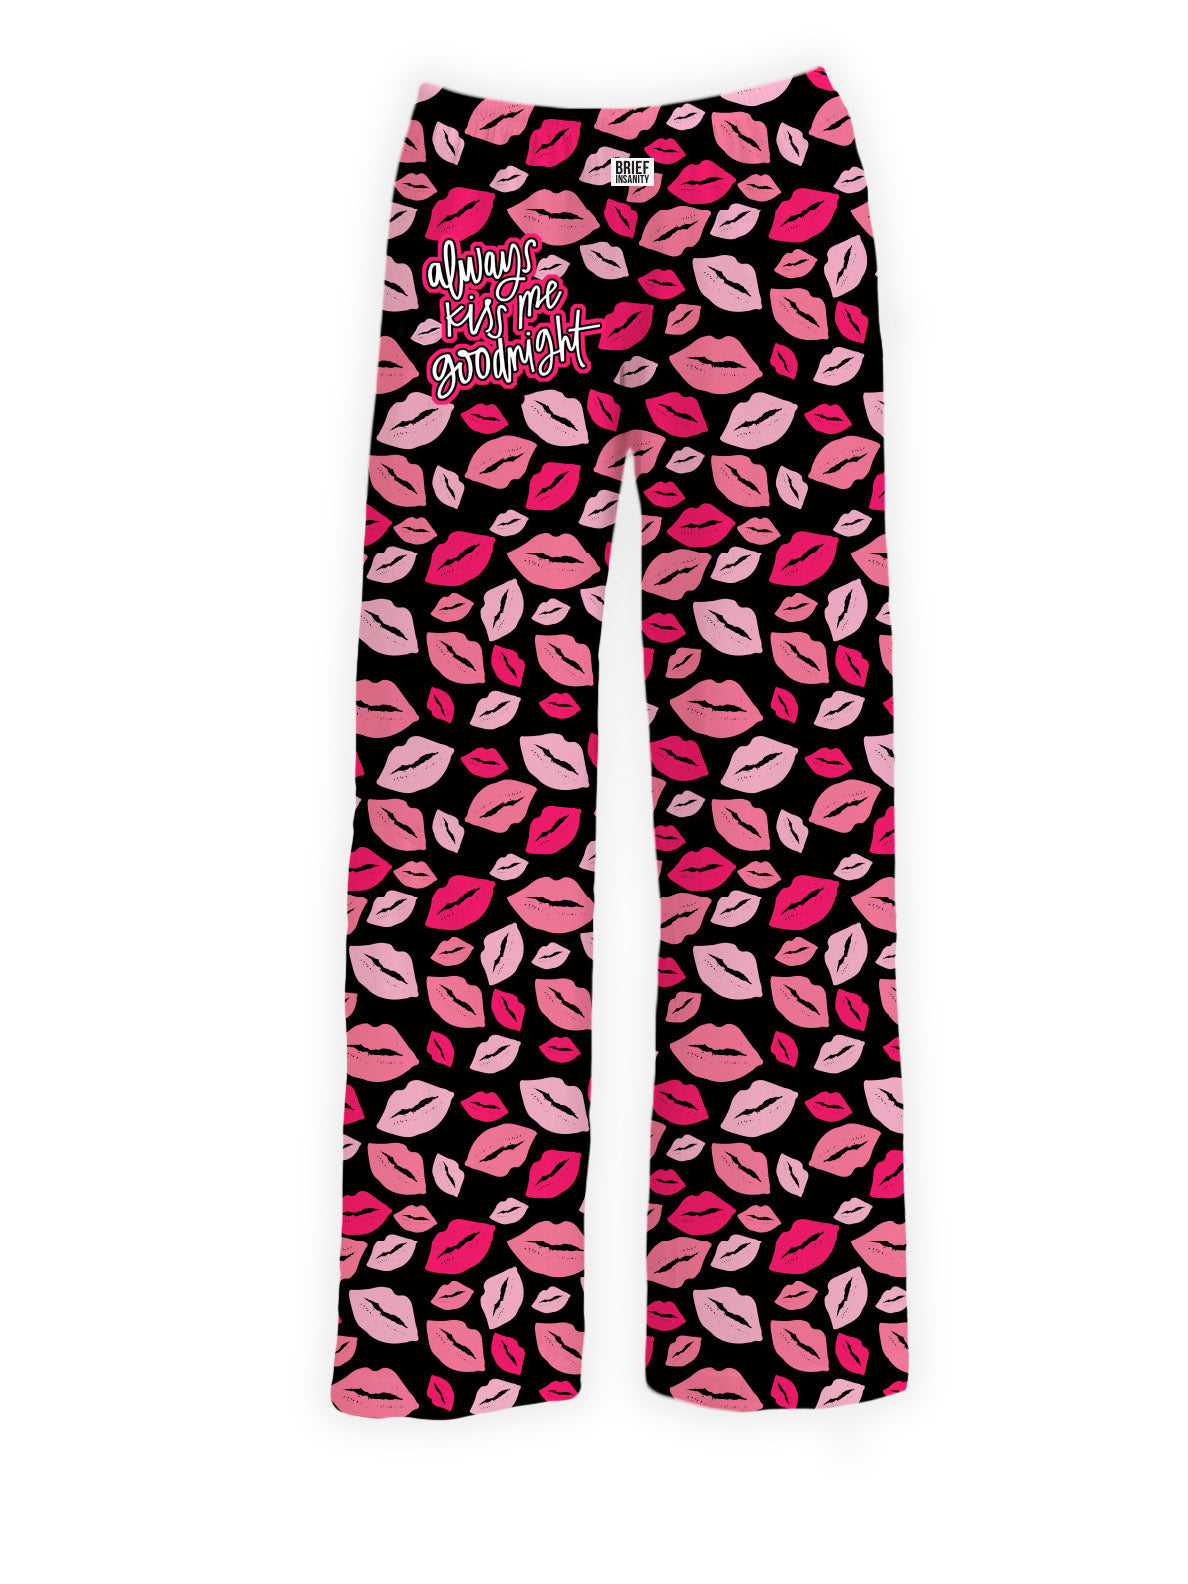 BRIEF INSANITY's Black And Pink Always Kiss Me Goodnight Pajama Lounge Pants